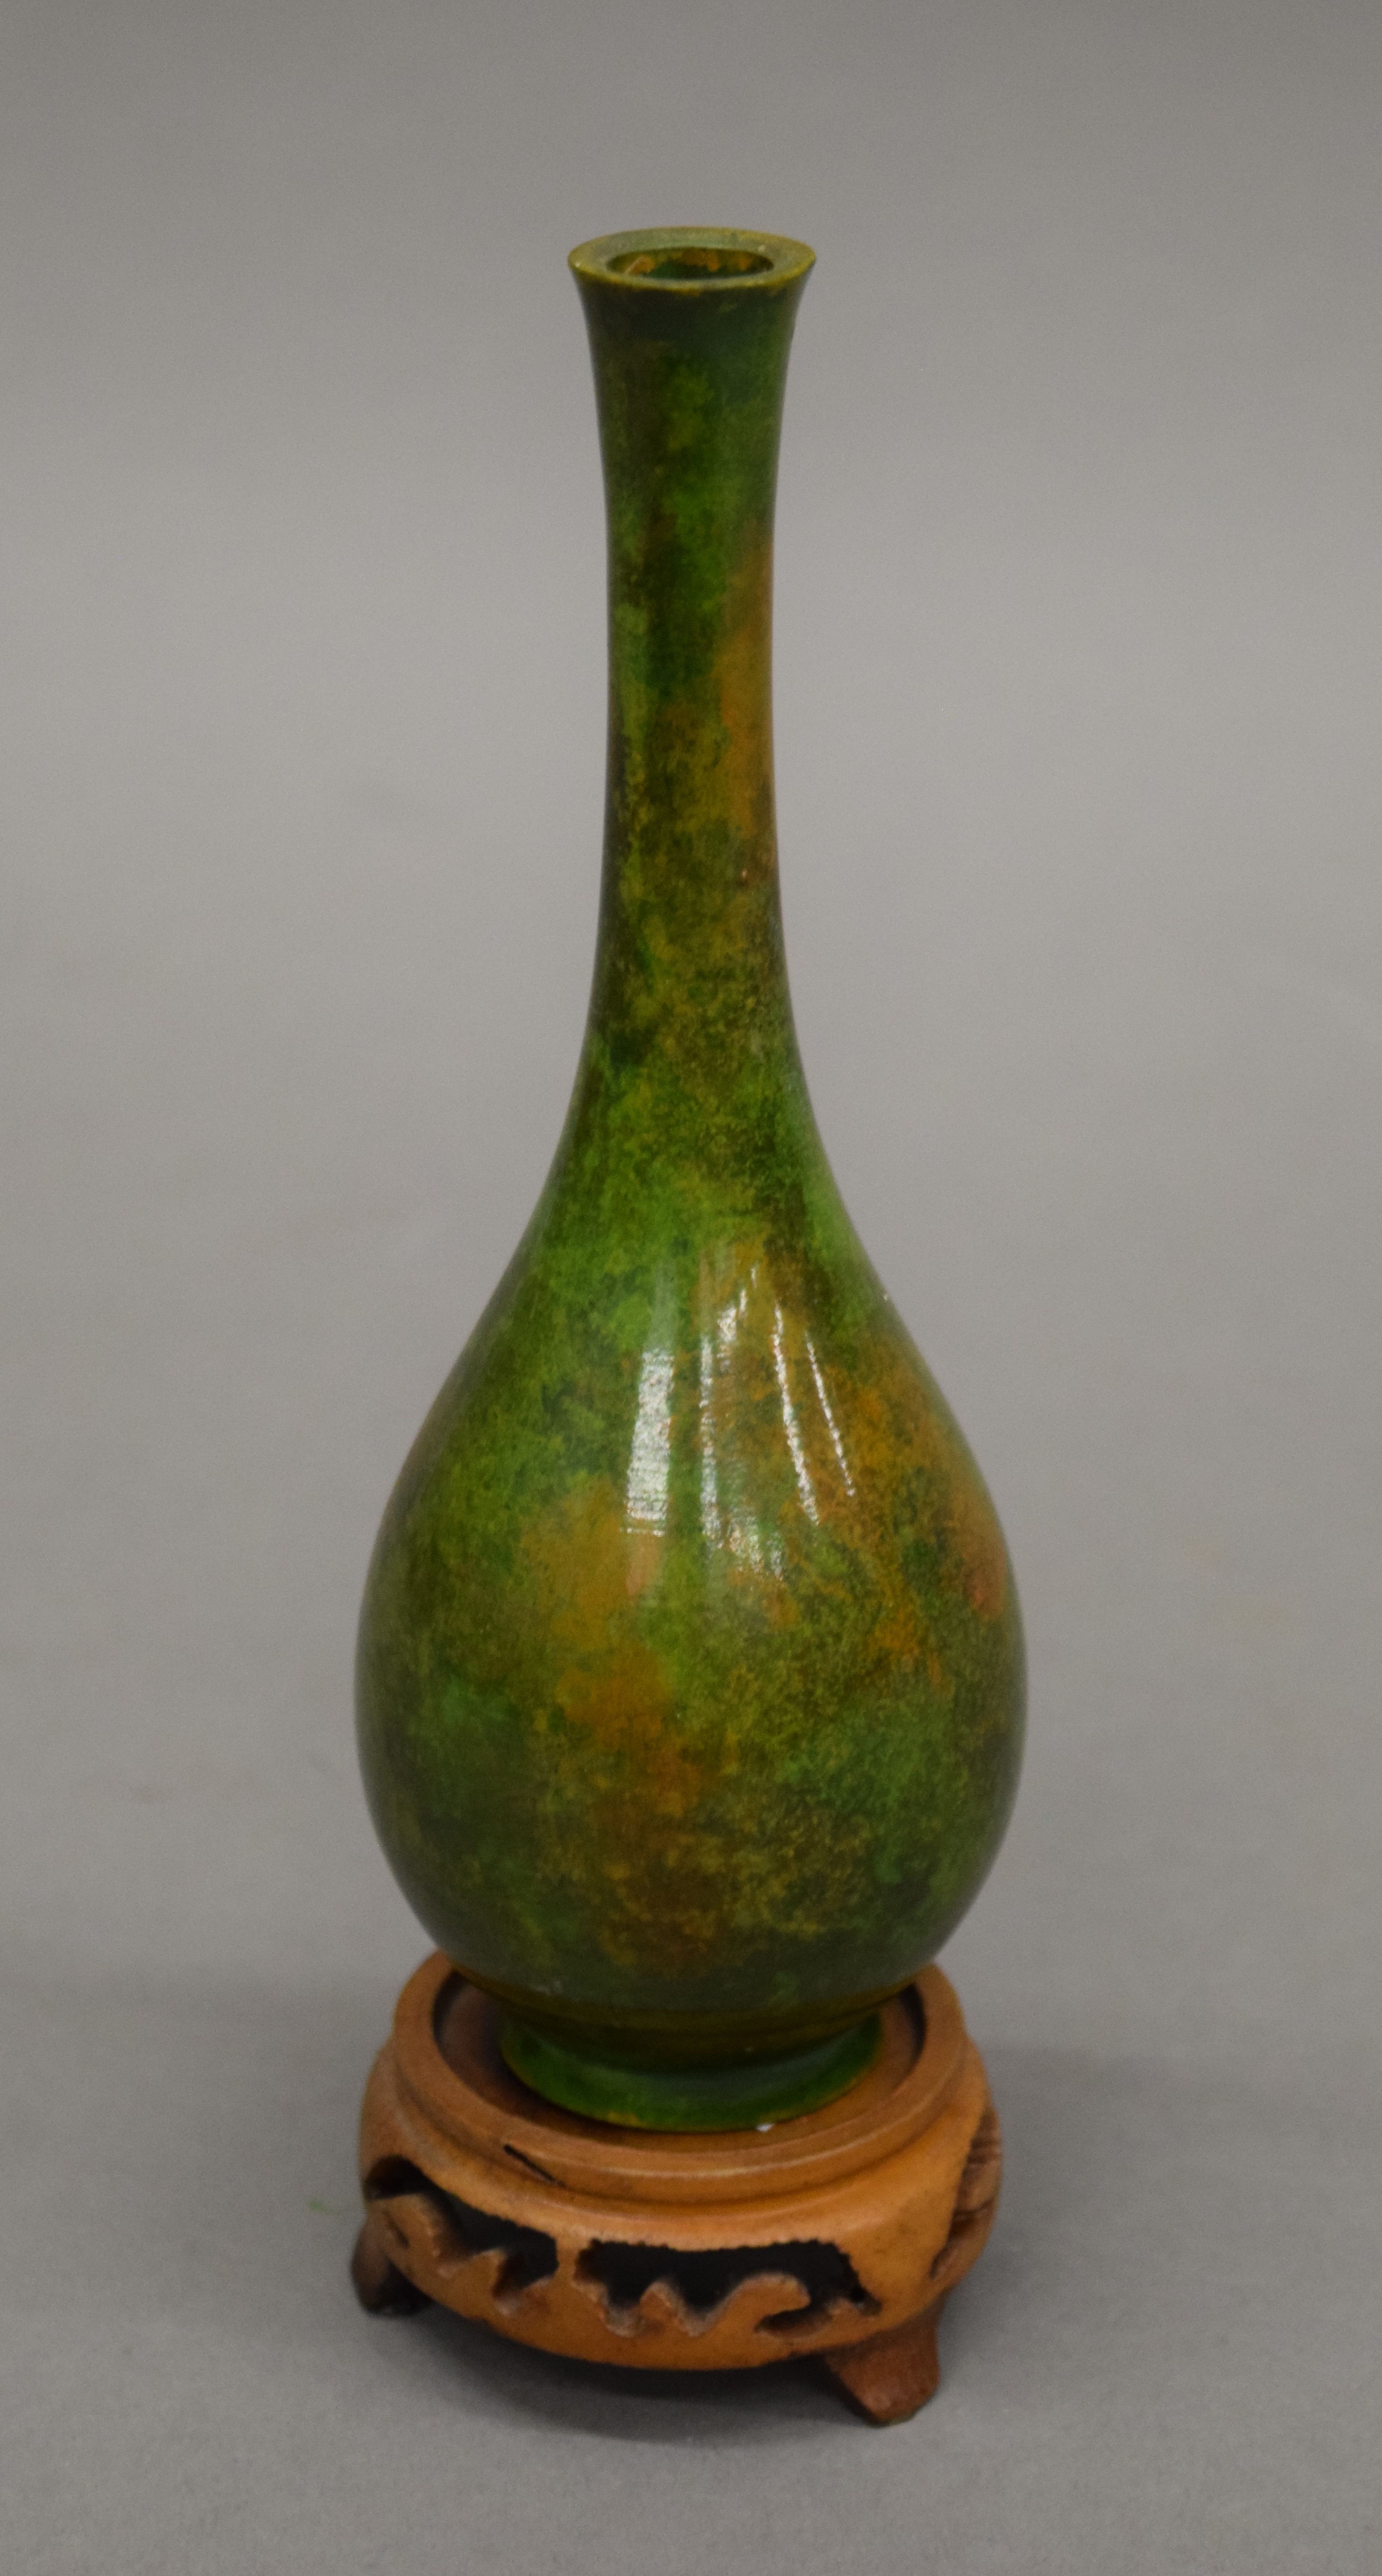 A small Japanese patinated bottle vase on a carved stand. 19 cm high overall.